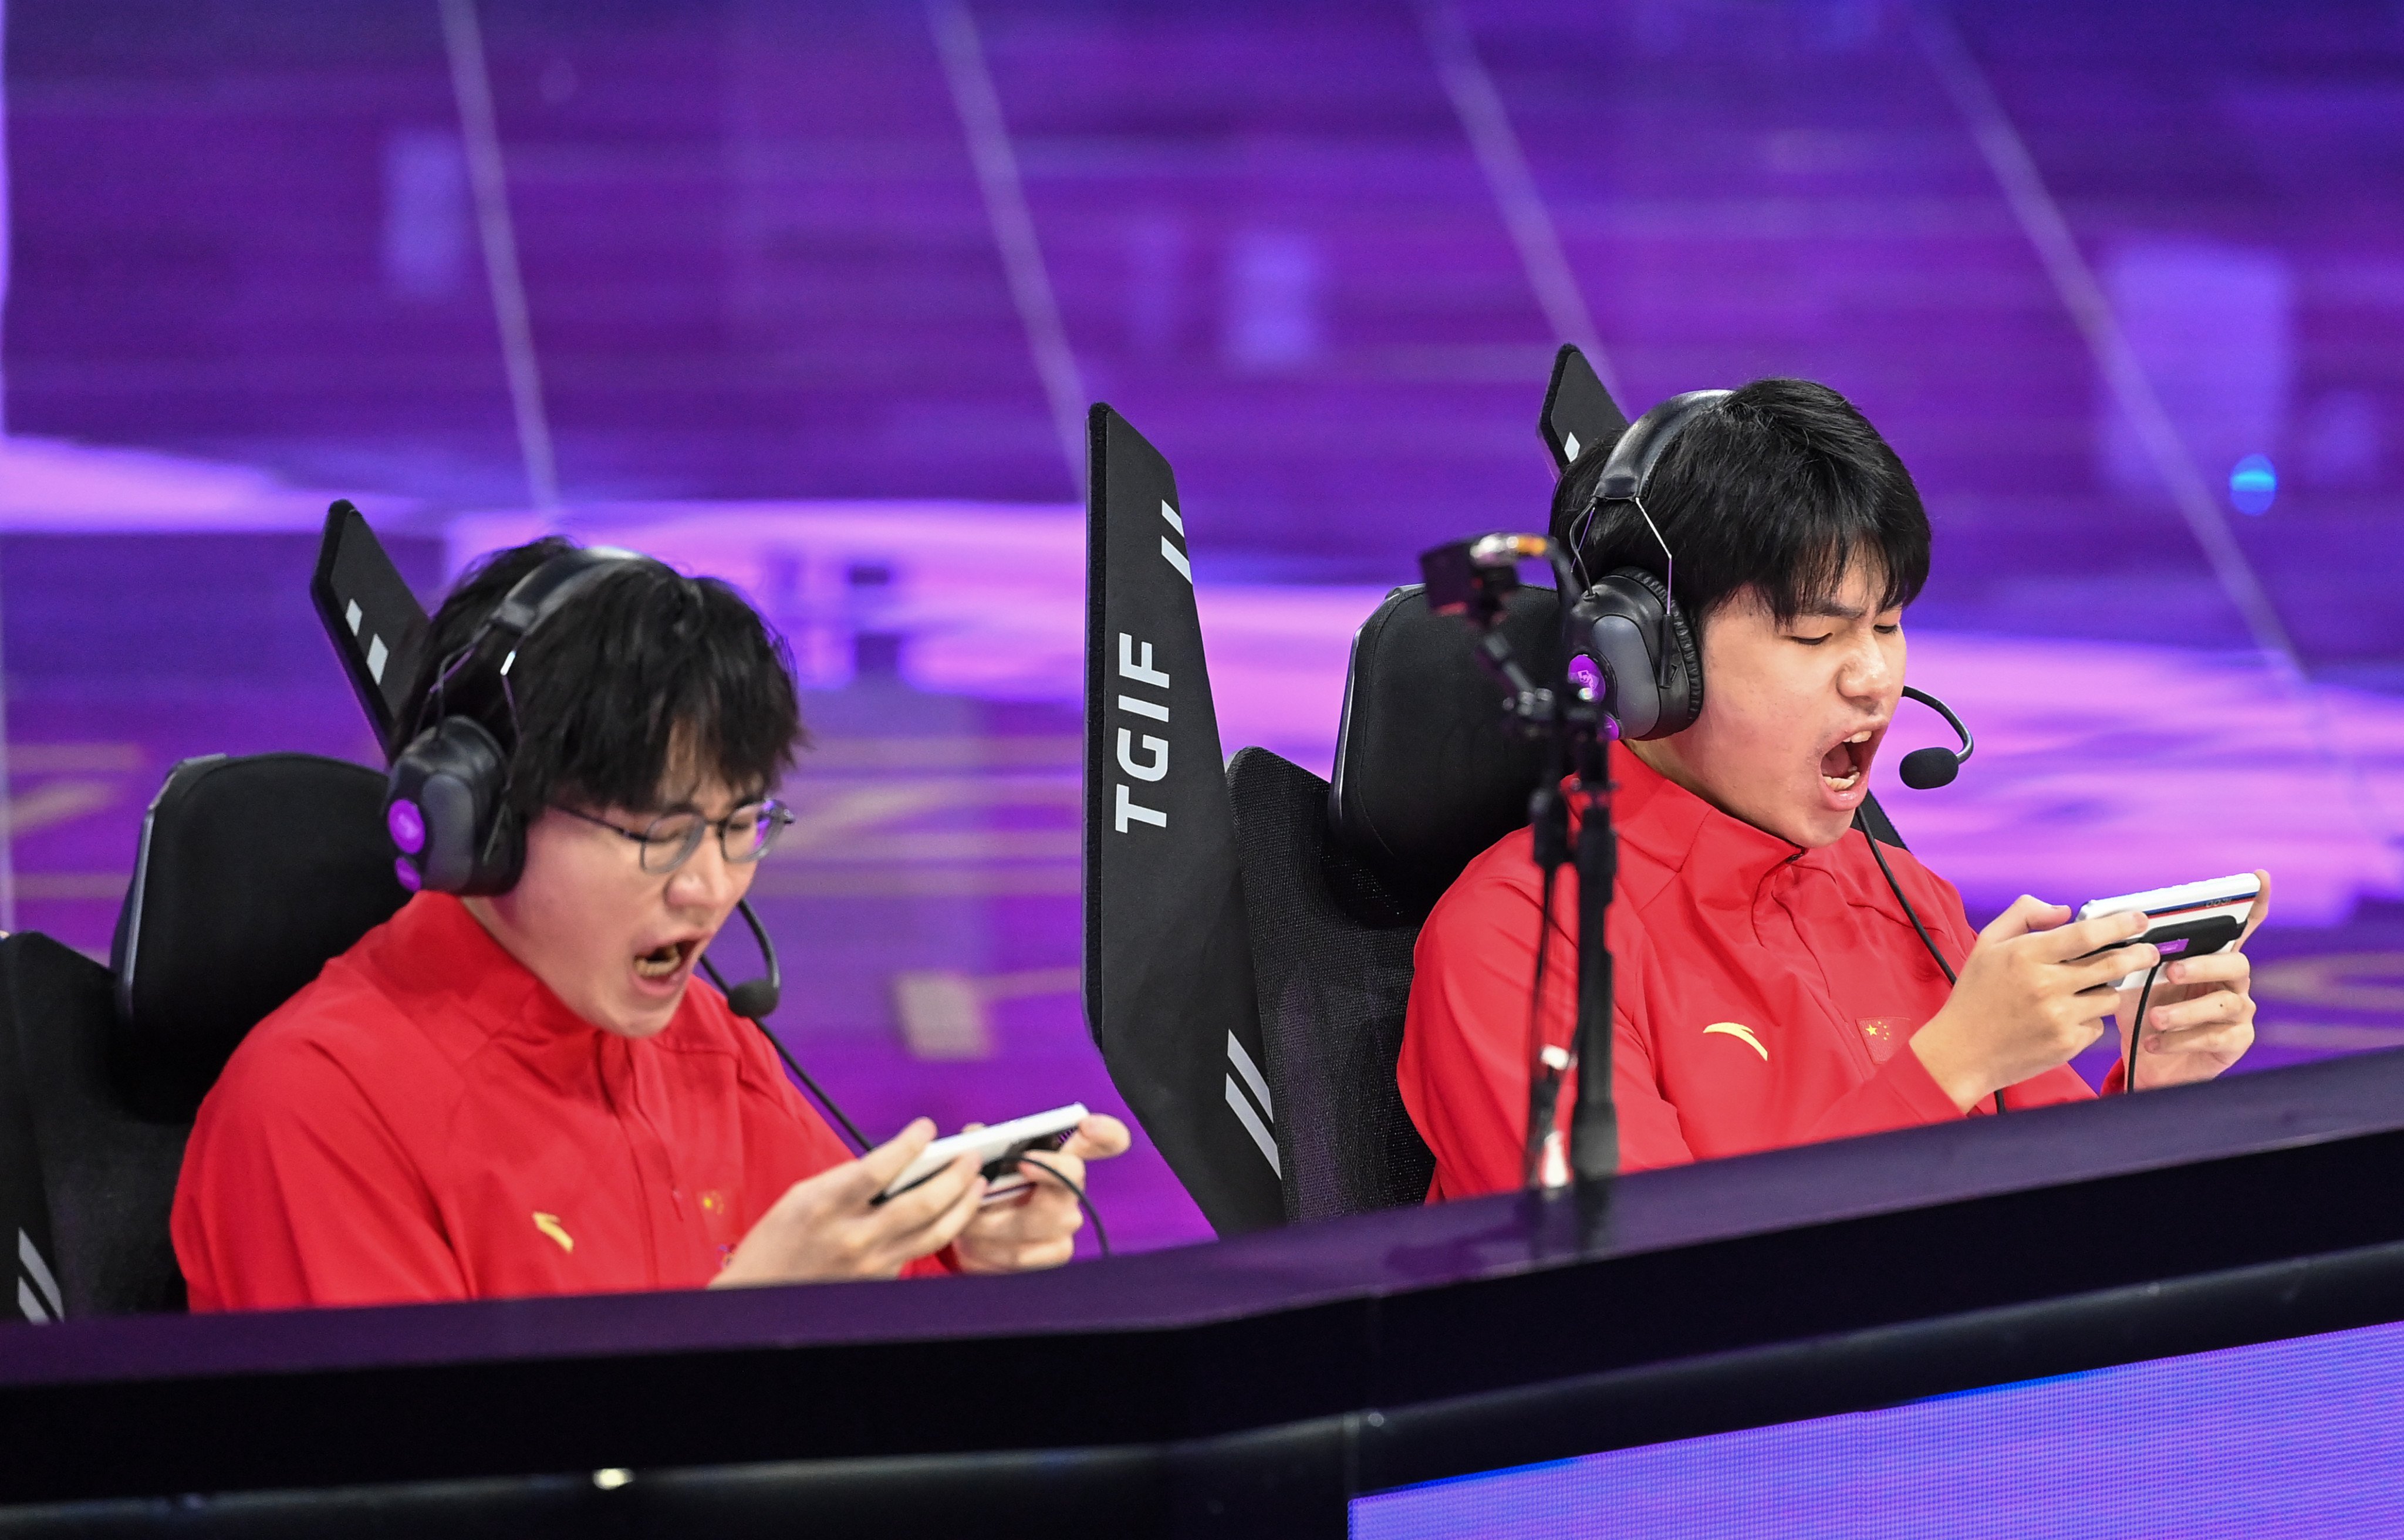 Esports is making its Asian Games debut and has drawn in thousands of spectators. Photo: Xinhua